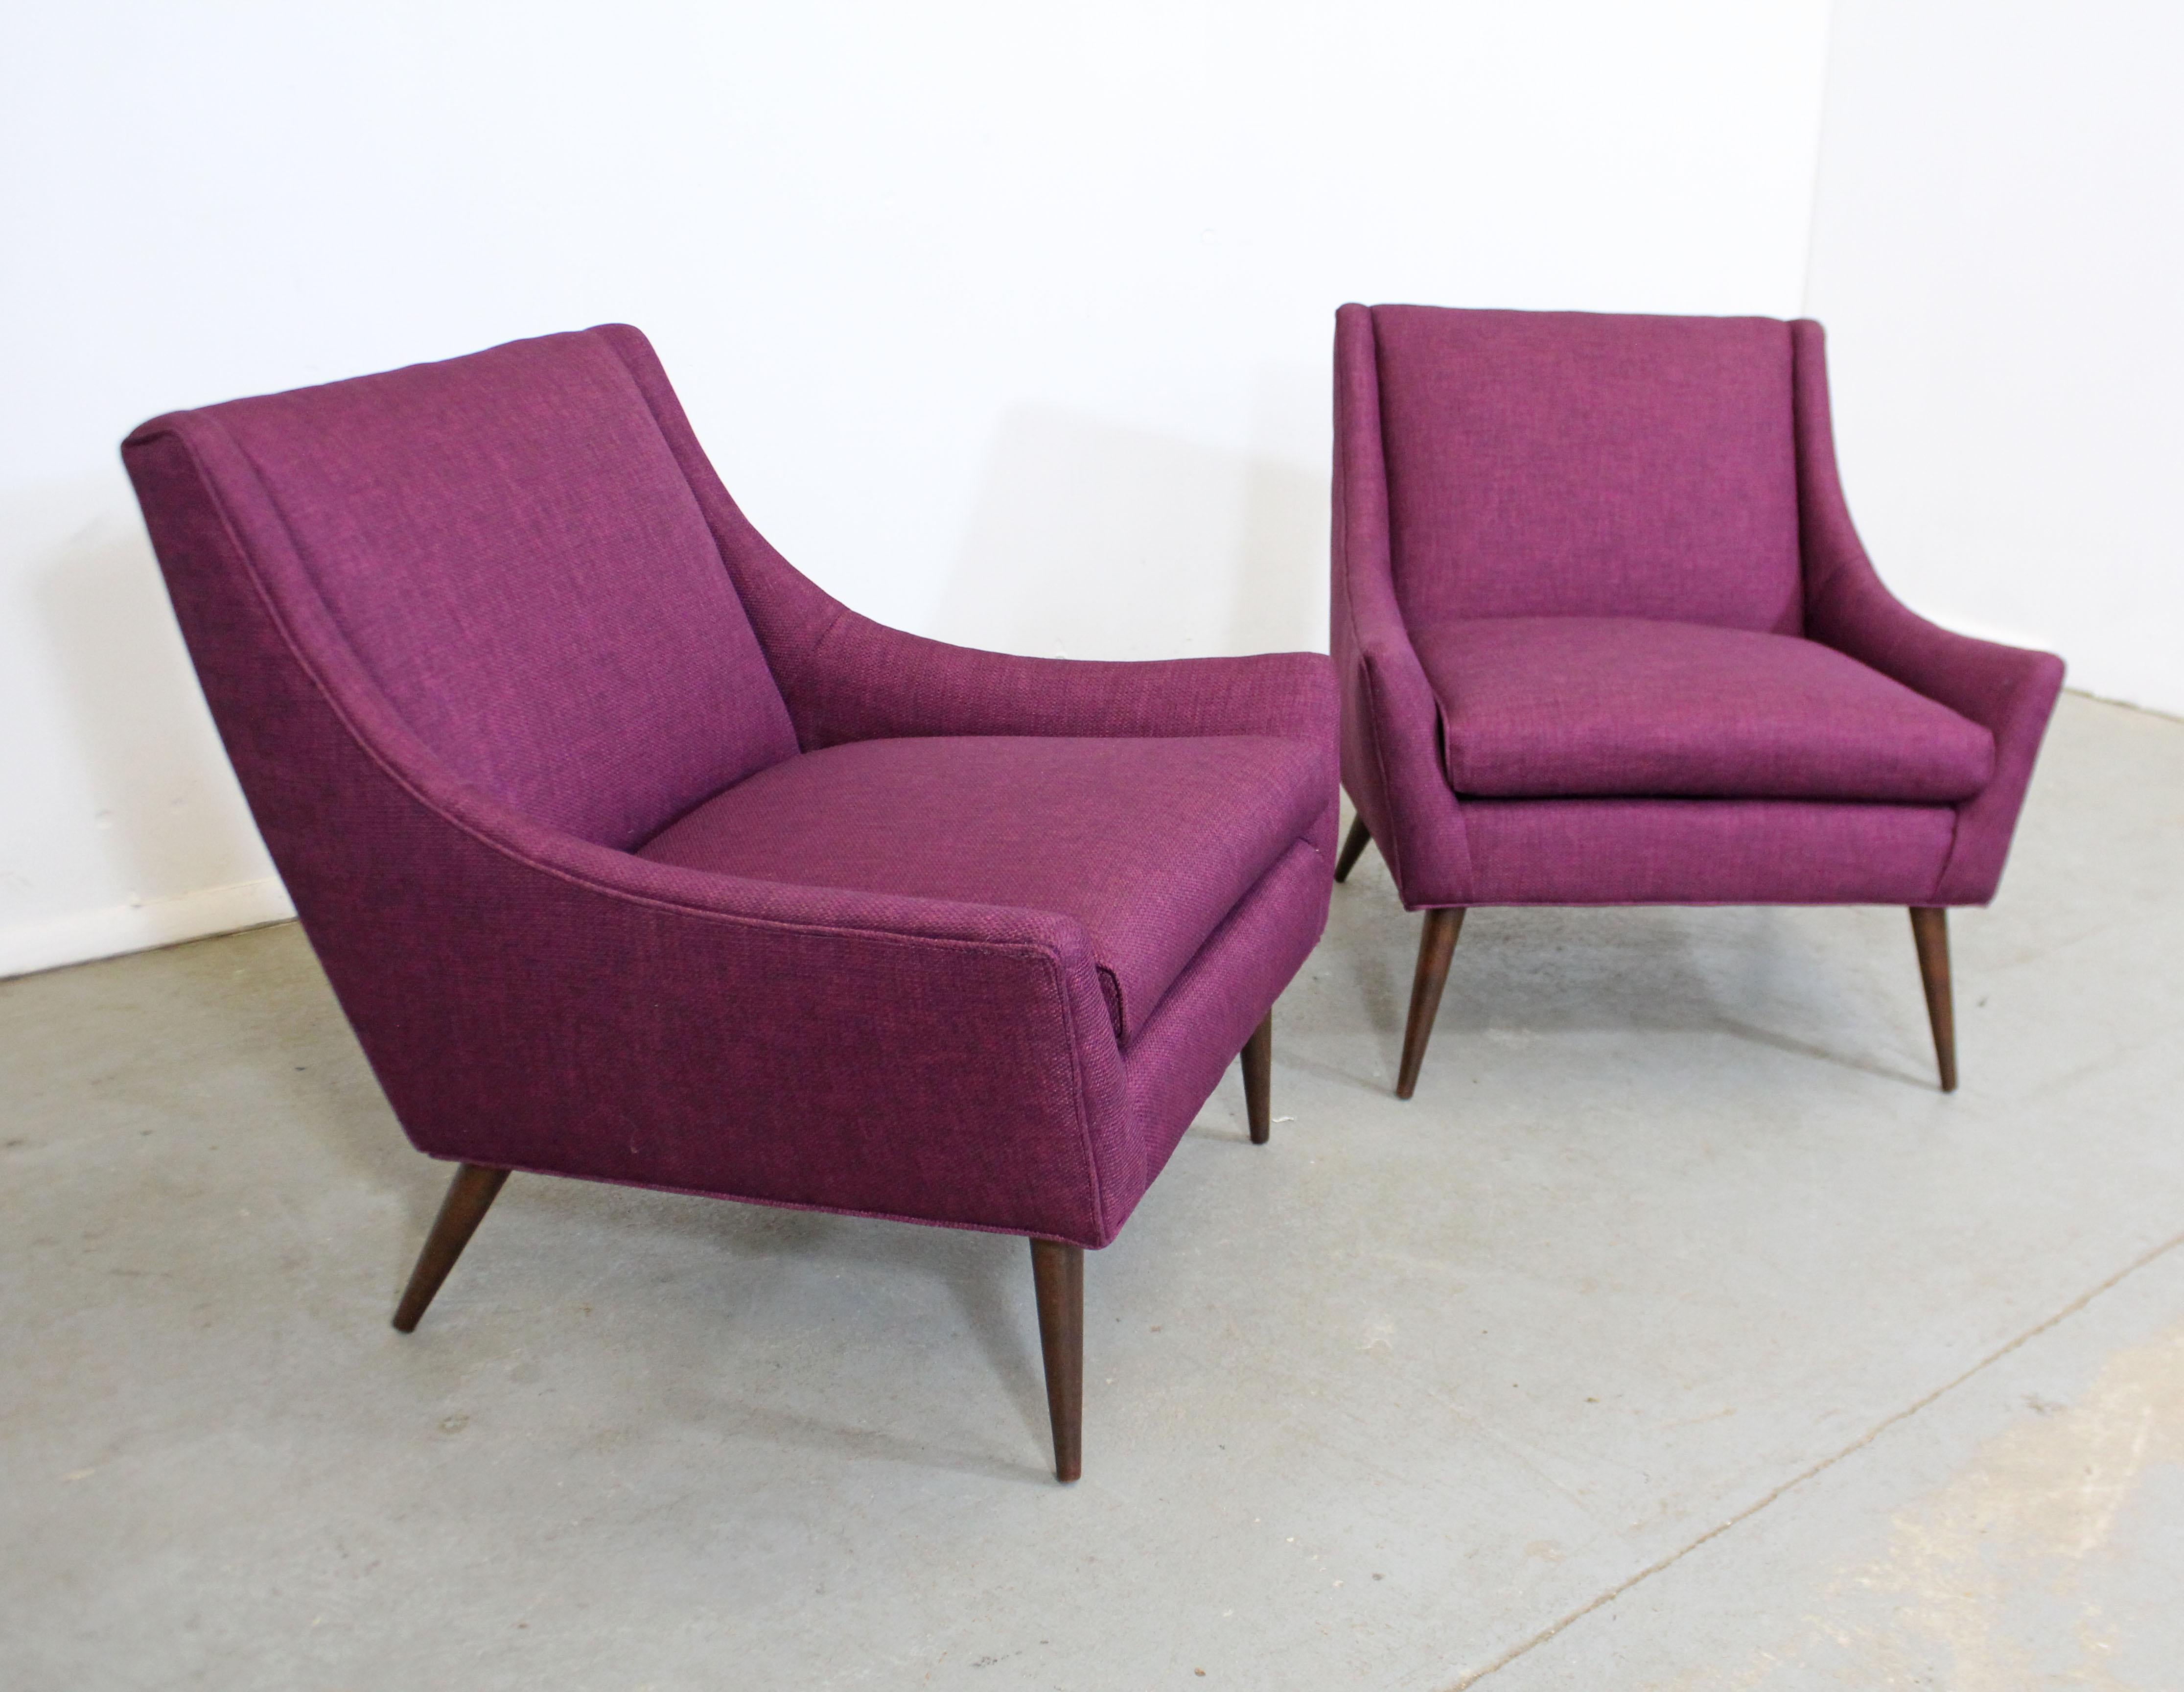 Offered is a pair of gorgeous Mid-Century Modern lounge chairs similar to the style of Paul McCobb. Absolutely incredible lines on these chairs. They have been freshly reupholstered with 'Wild Raspberry' textured fabric. Includes arm and back